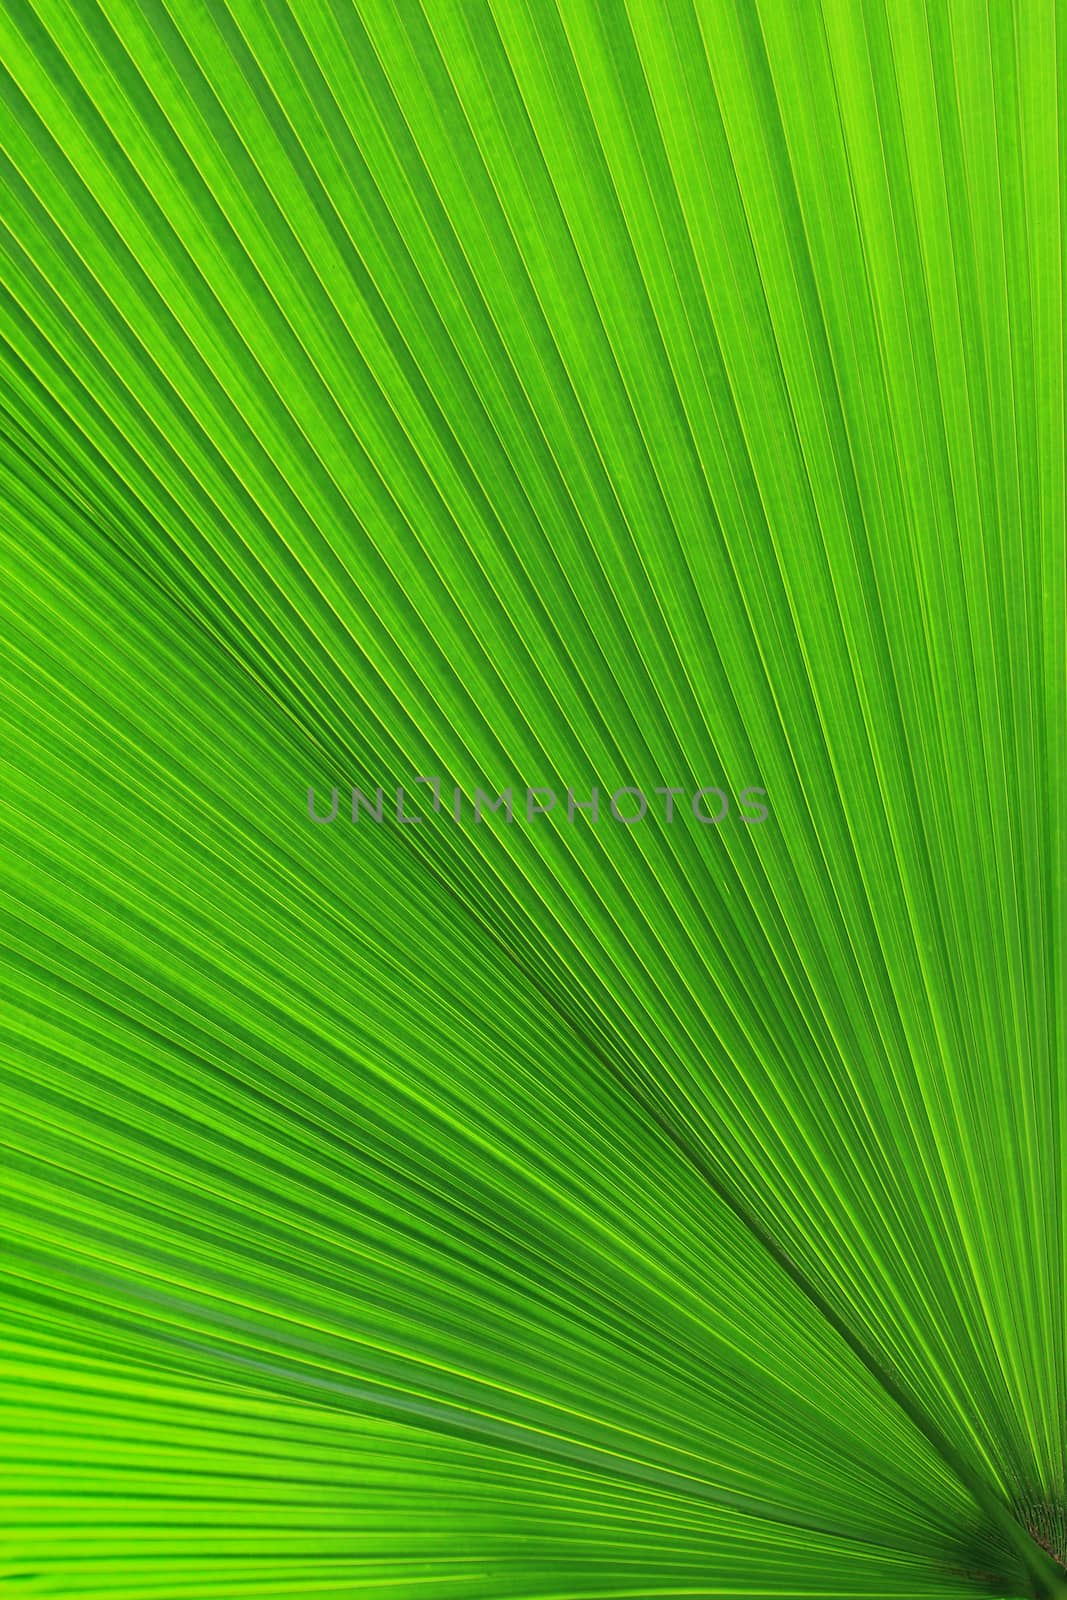 Texture of Green palm Leaf by foto76